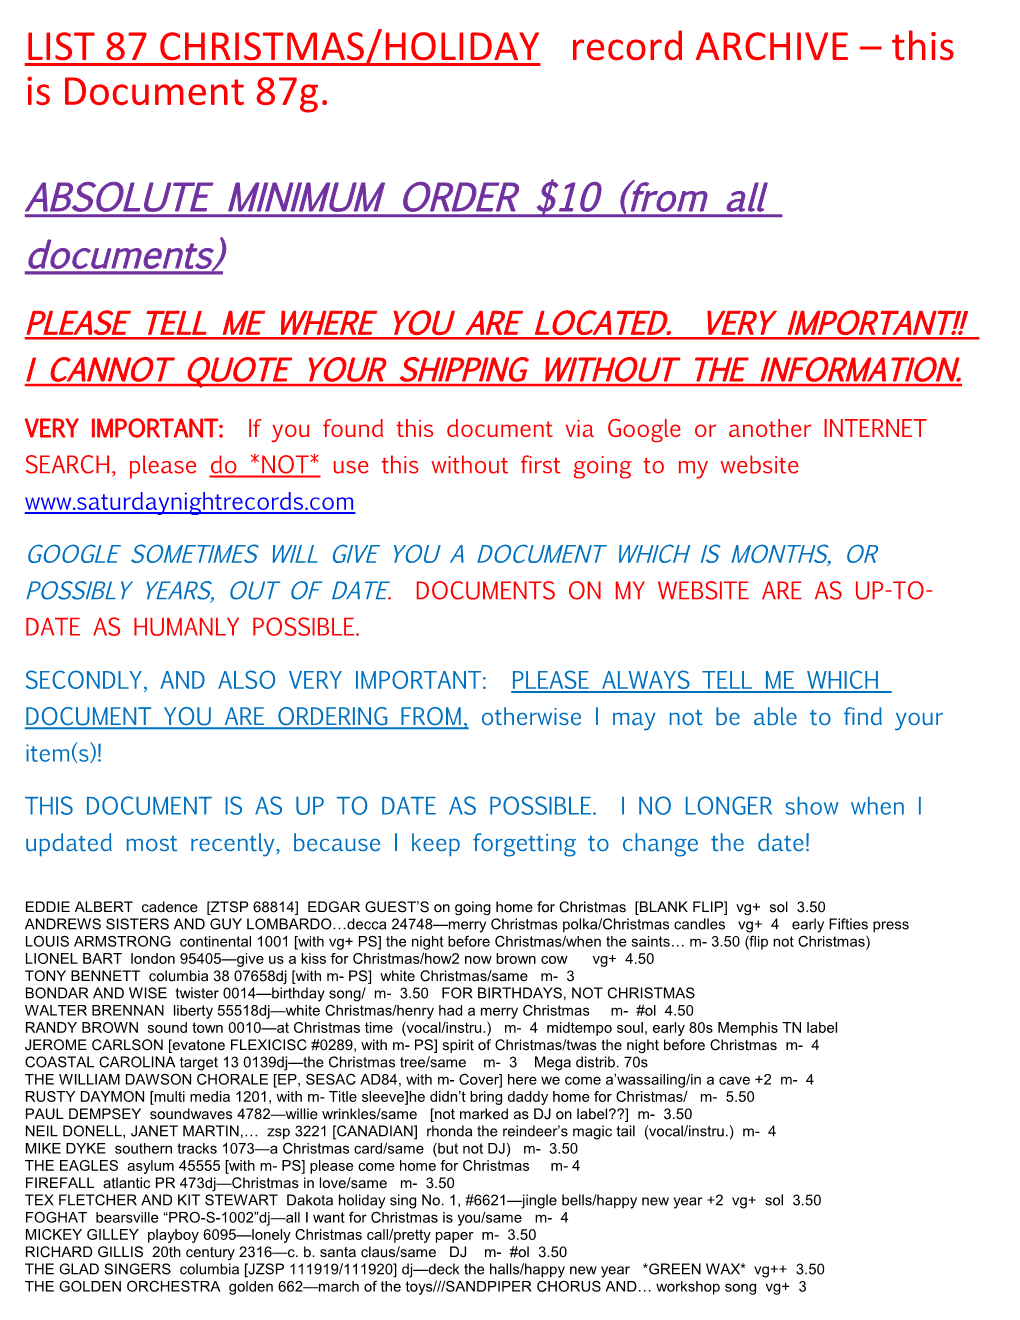 ABSOLUTE MINIMUM ORDER $10 (From All Documents)